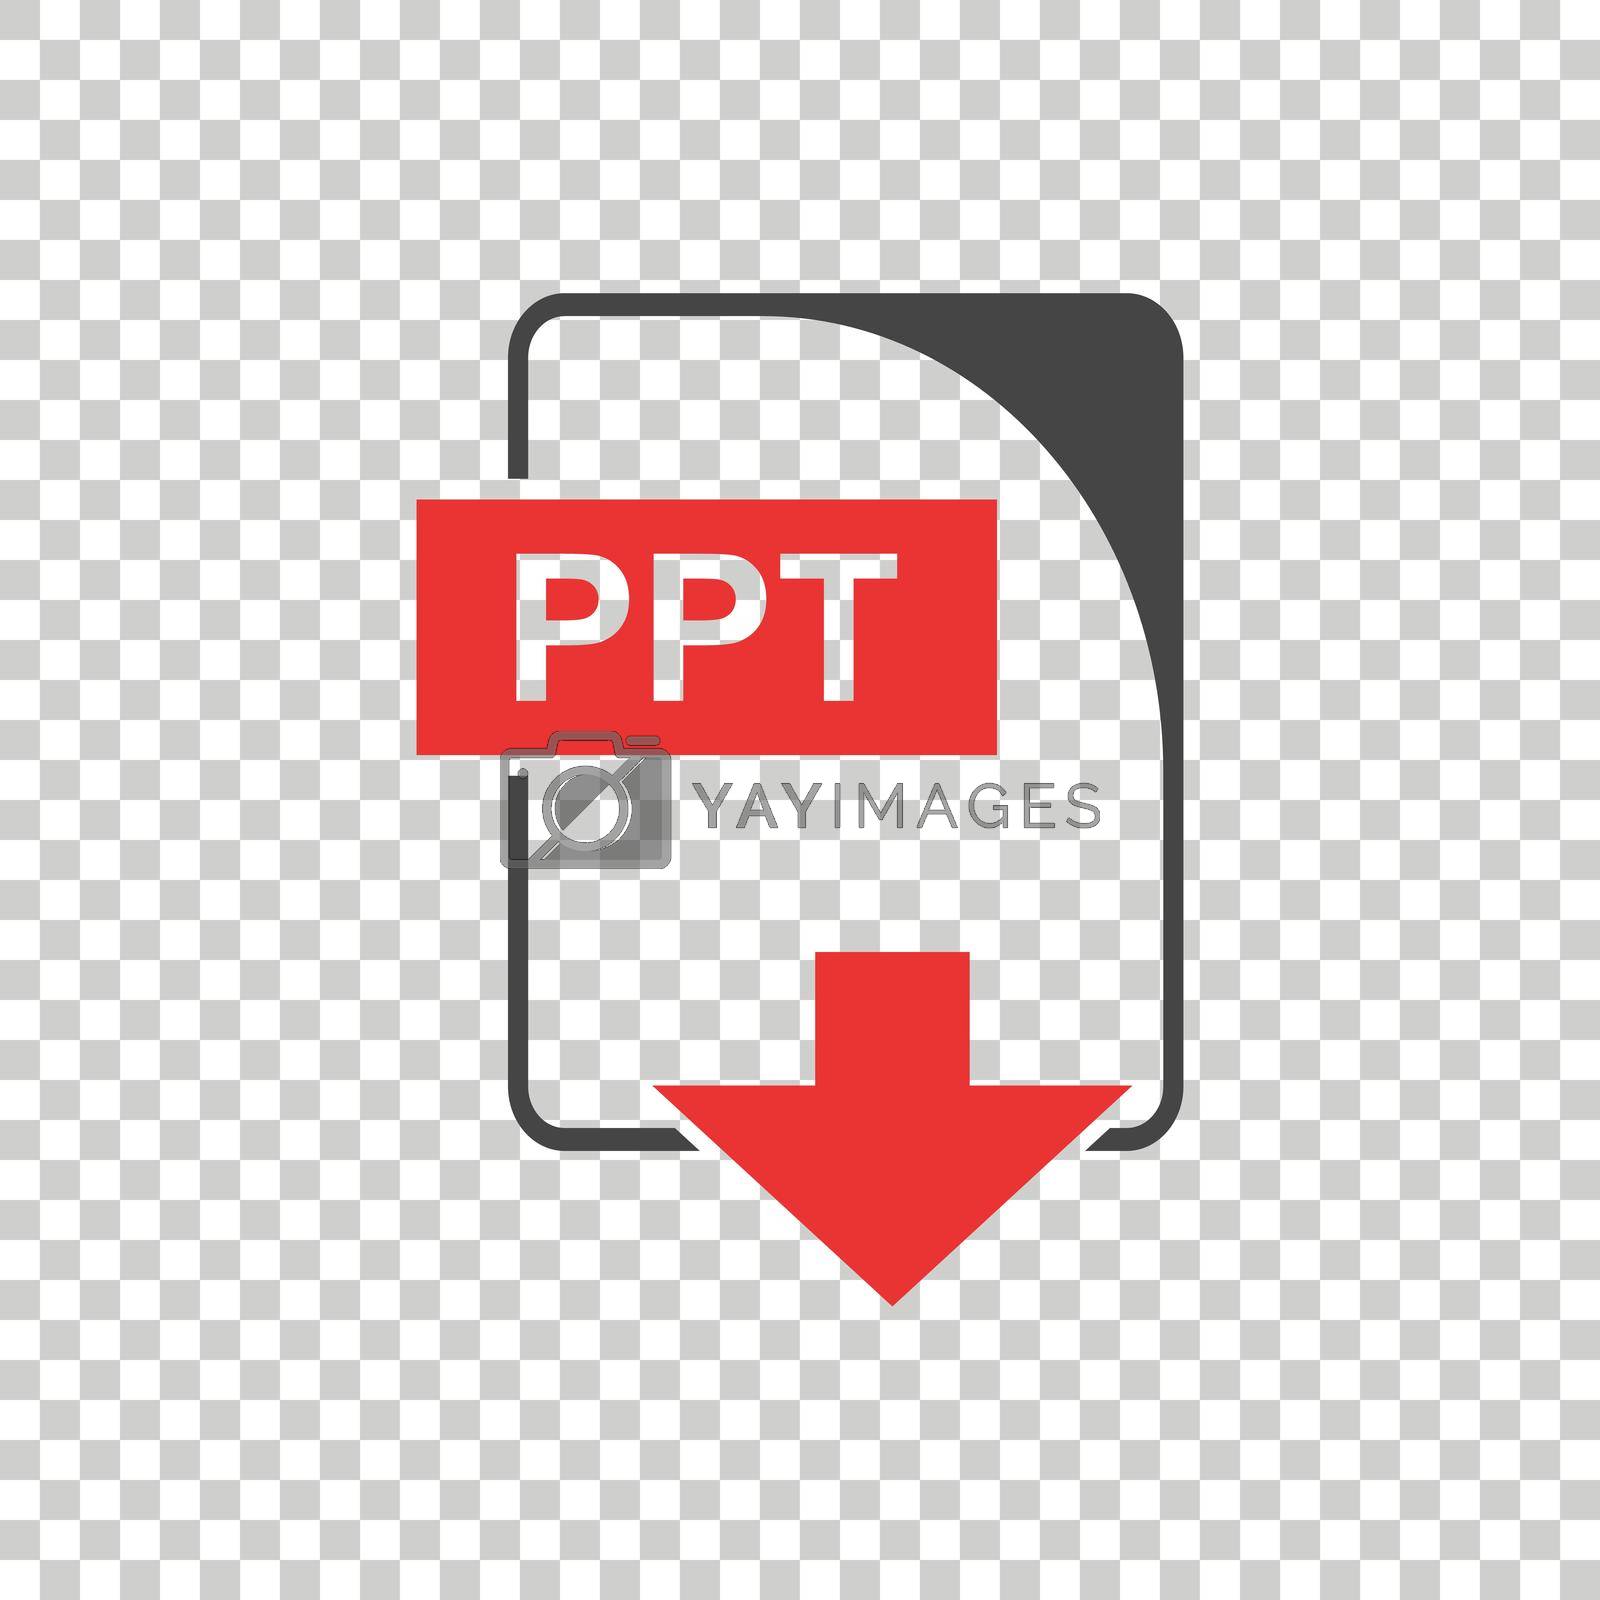 Royalty free image of PPT Icon vector flat by LysenkoA